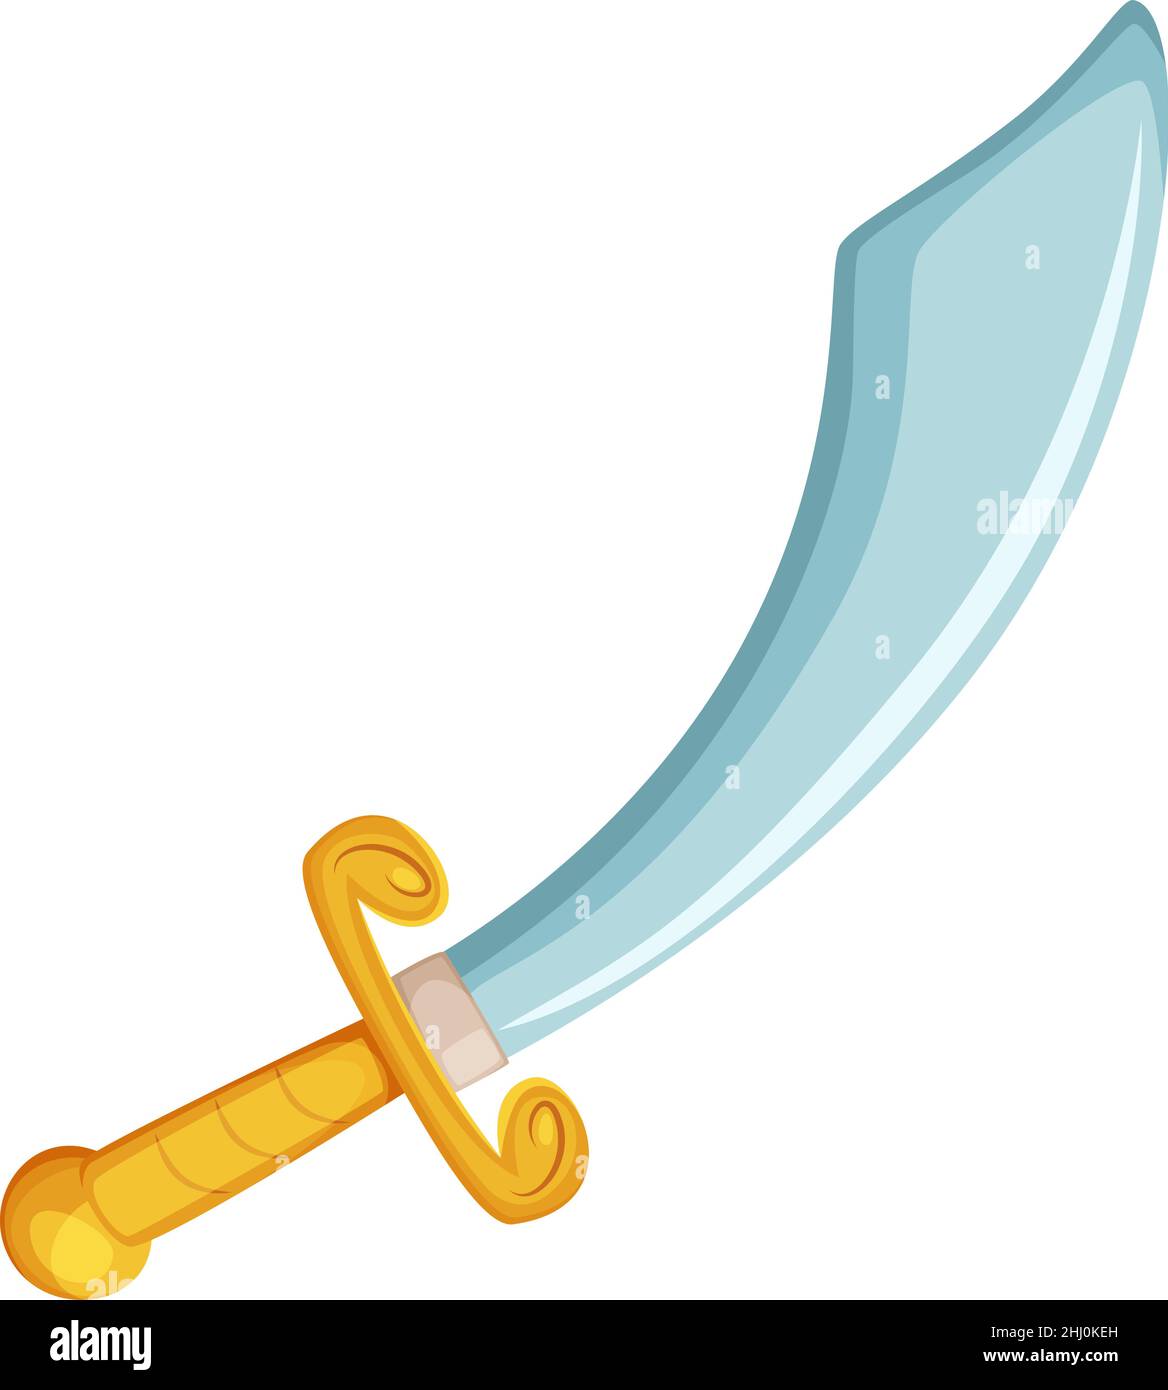 Sword icon. Kid toy blade for game fight Stock Vector